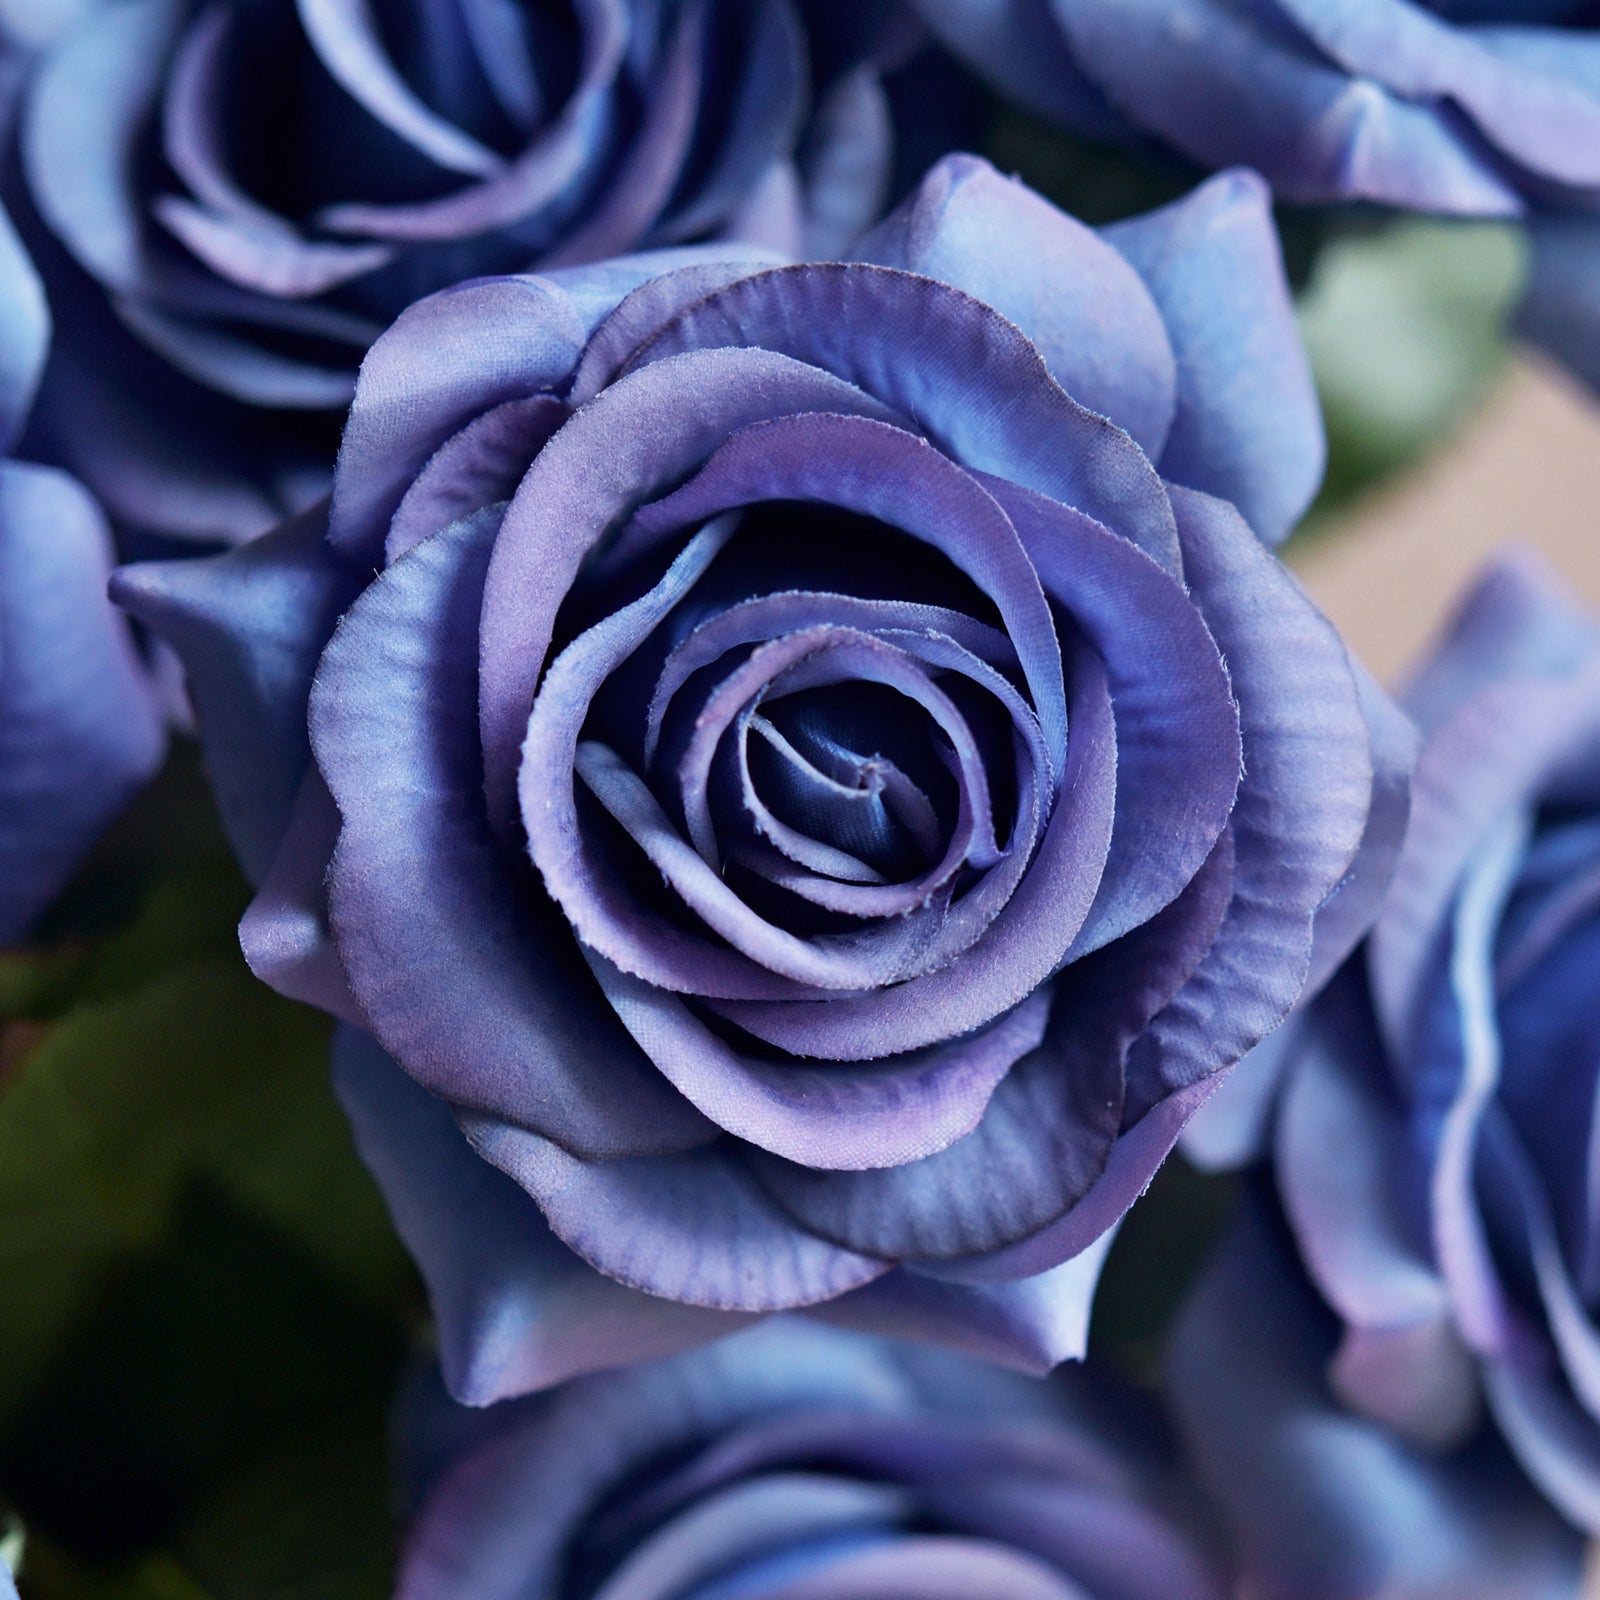 Midnight Blue Real Touch Silk Artificial Flowers ‘Petals Feel and Look like Fresh Roses 10 Stems